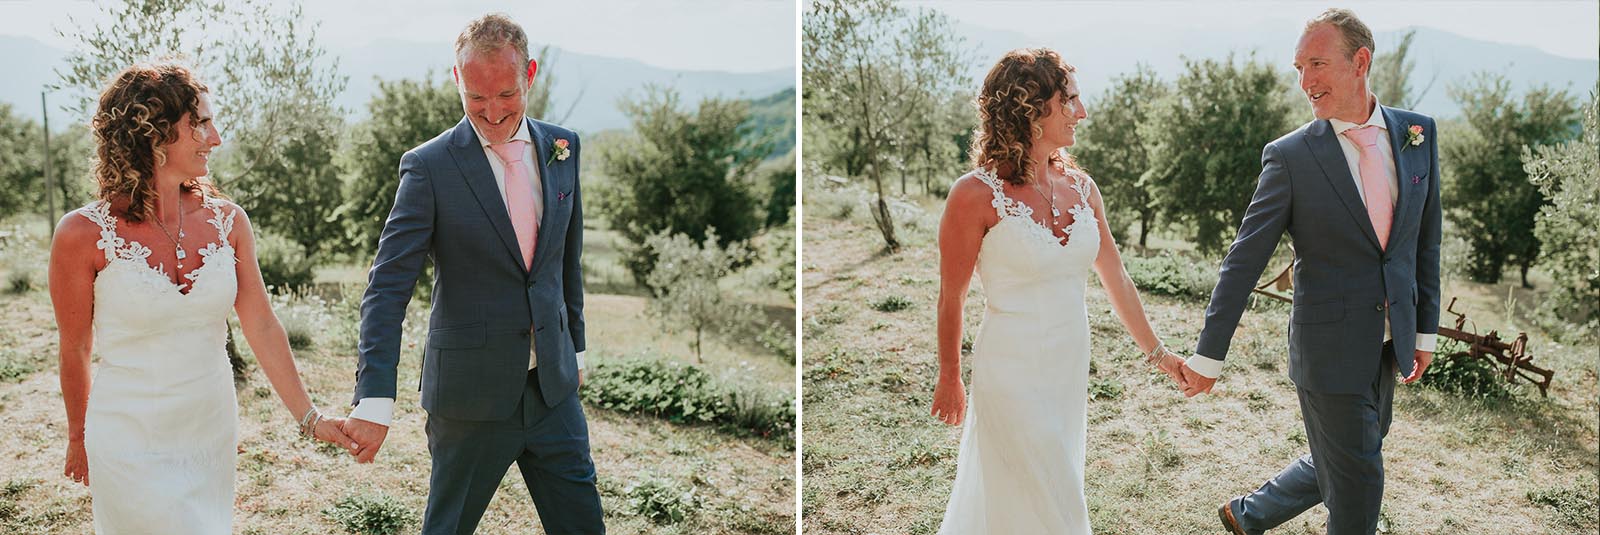 newlywed walking during golden hour in Tuscany Podere Conti